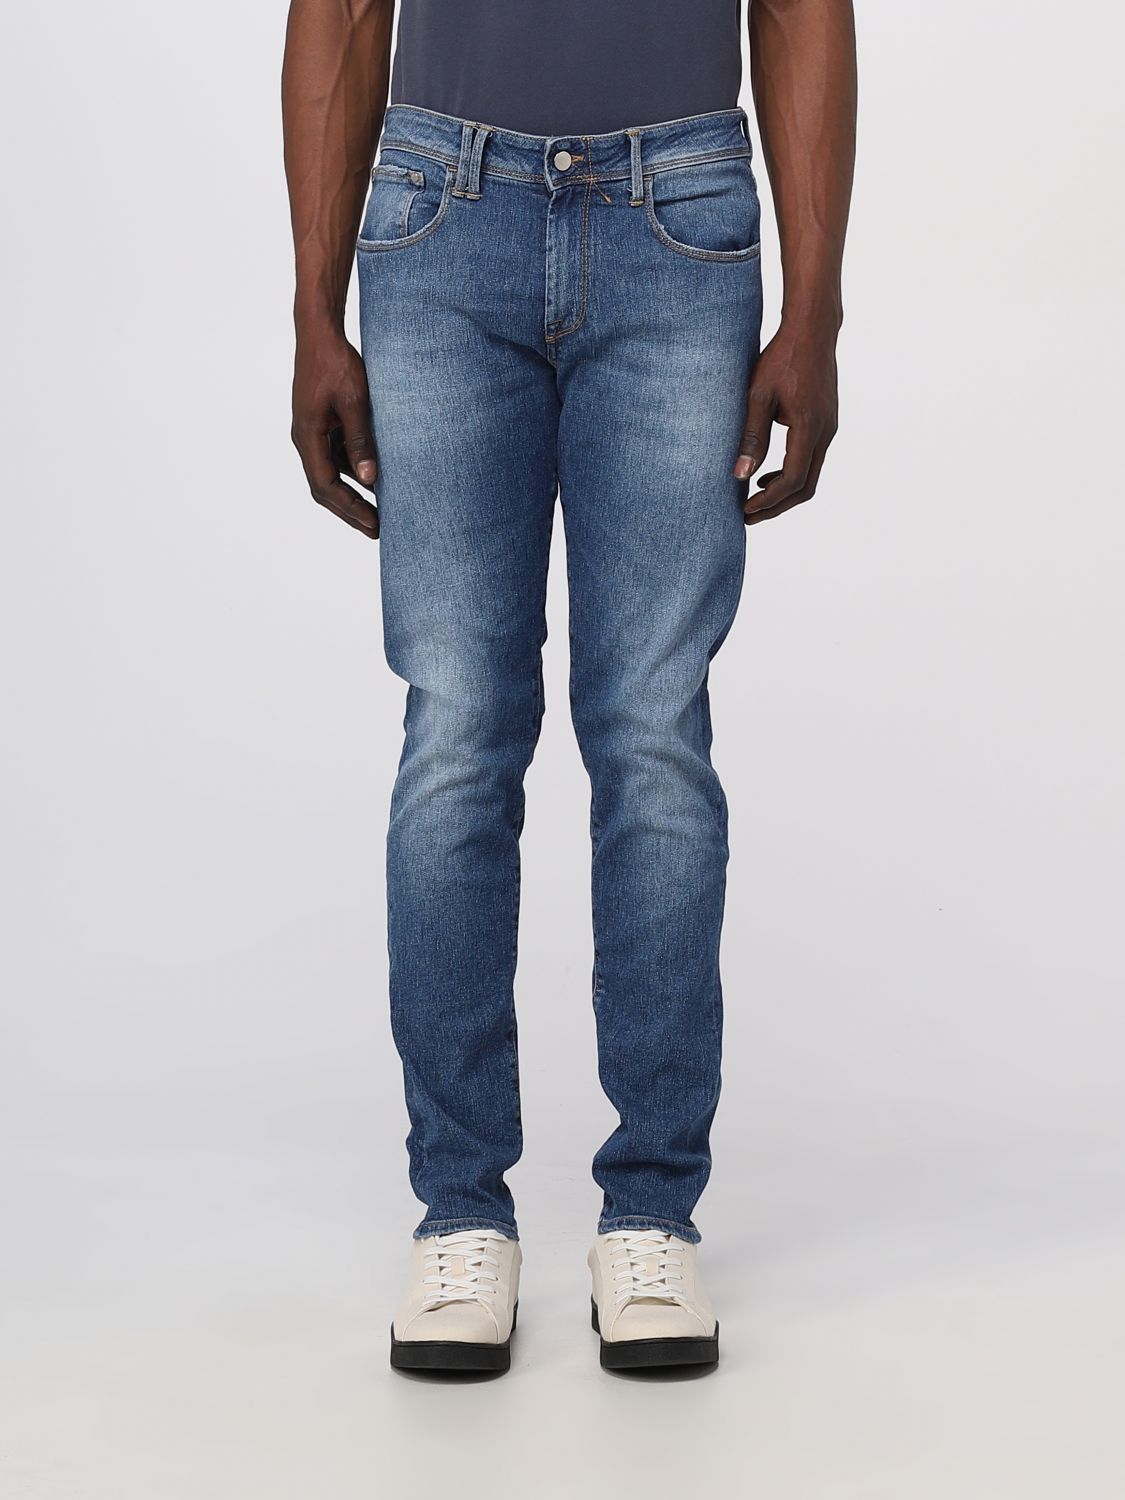 CYCLE: jeans for man - Blue | Cycle jeans CC321P505D006 online on ...